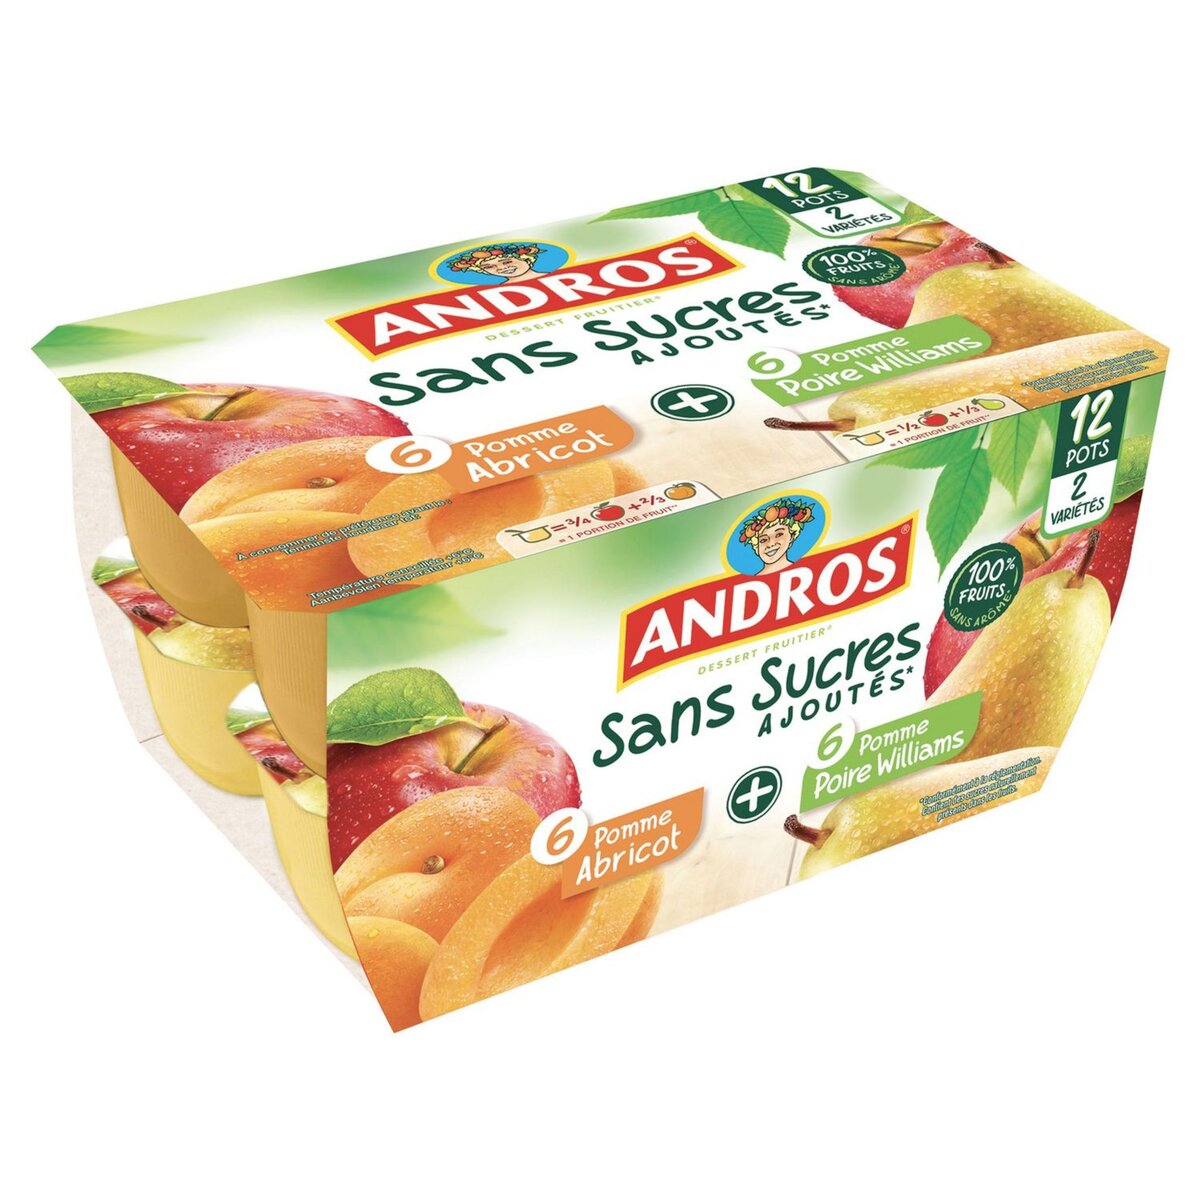 ANDROS Andros pomme abricot poire 12x100g